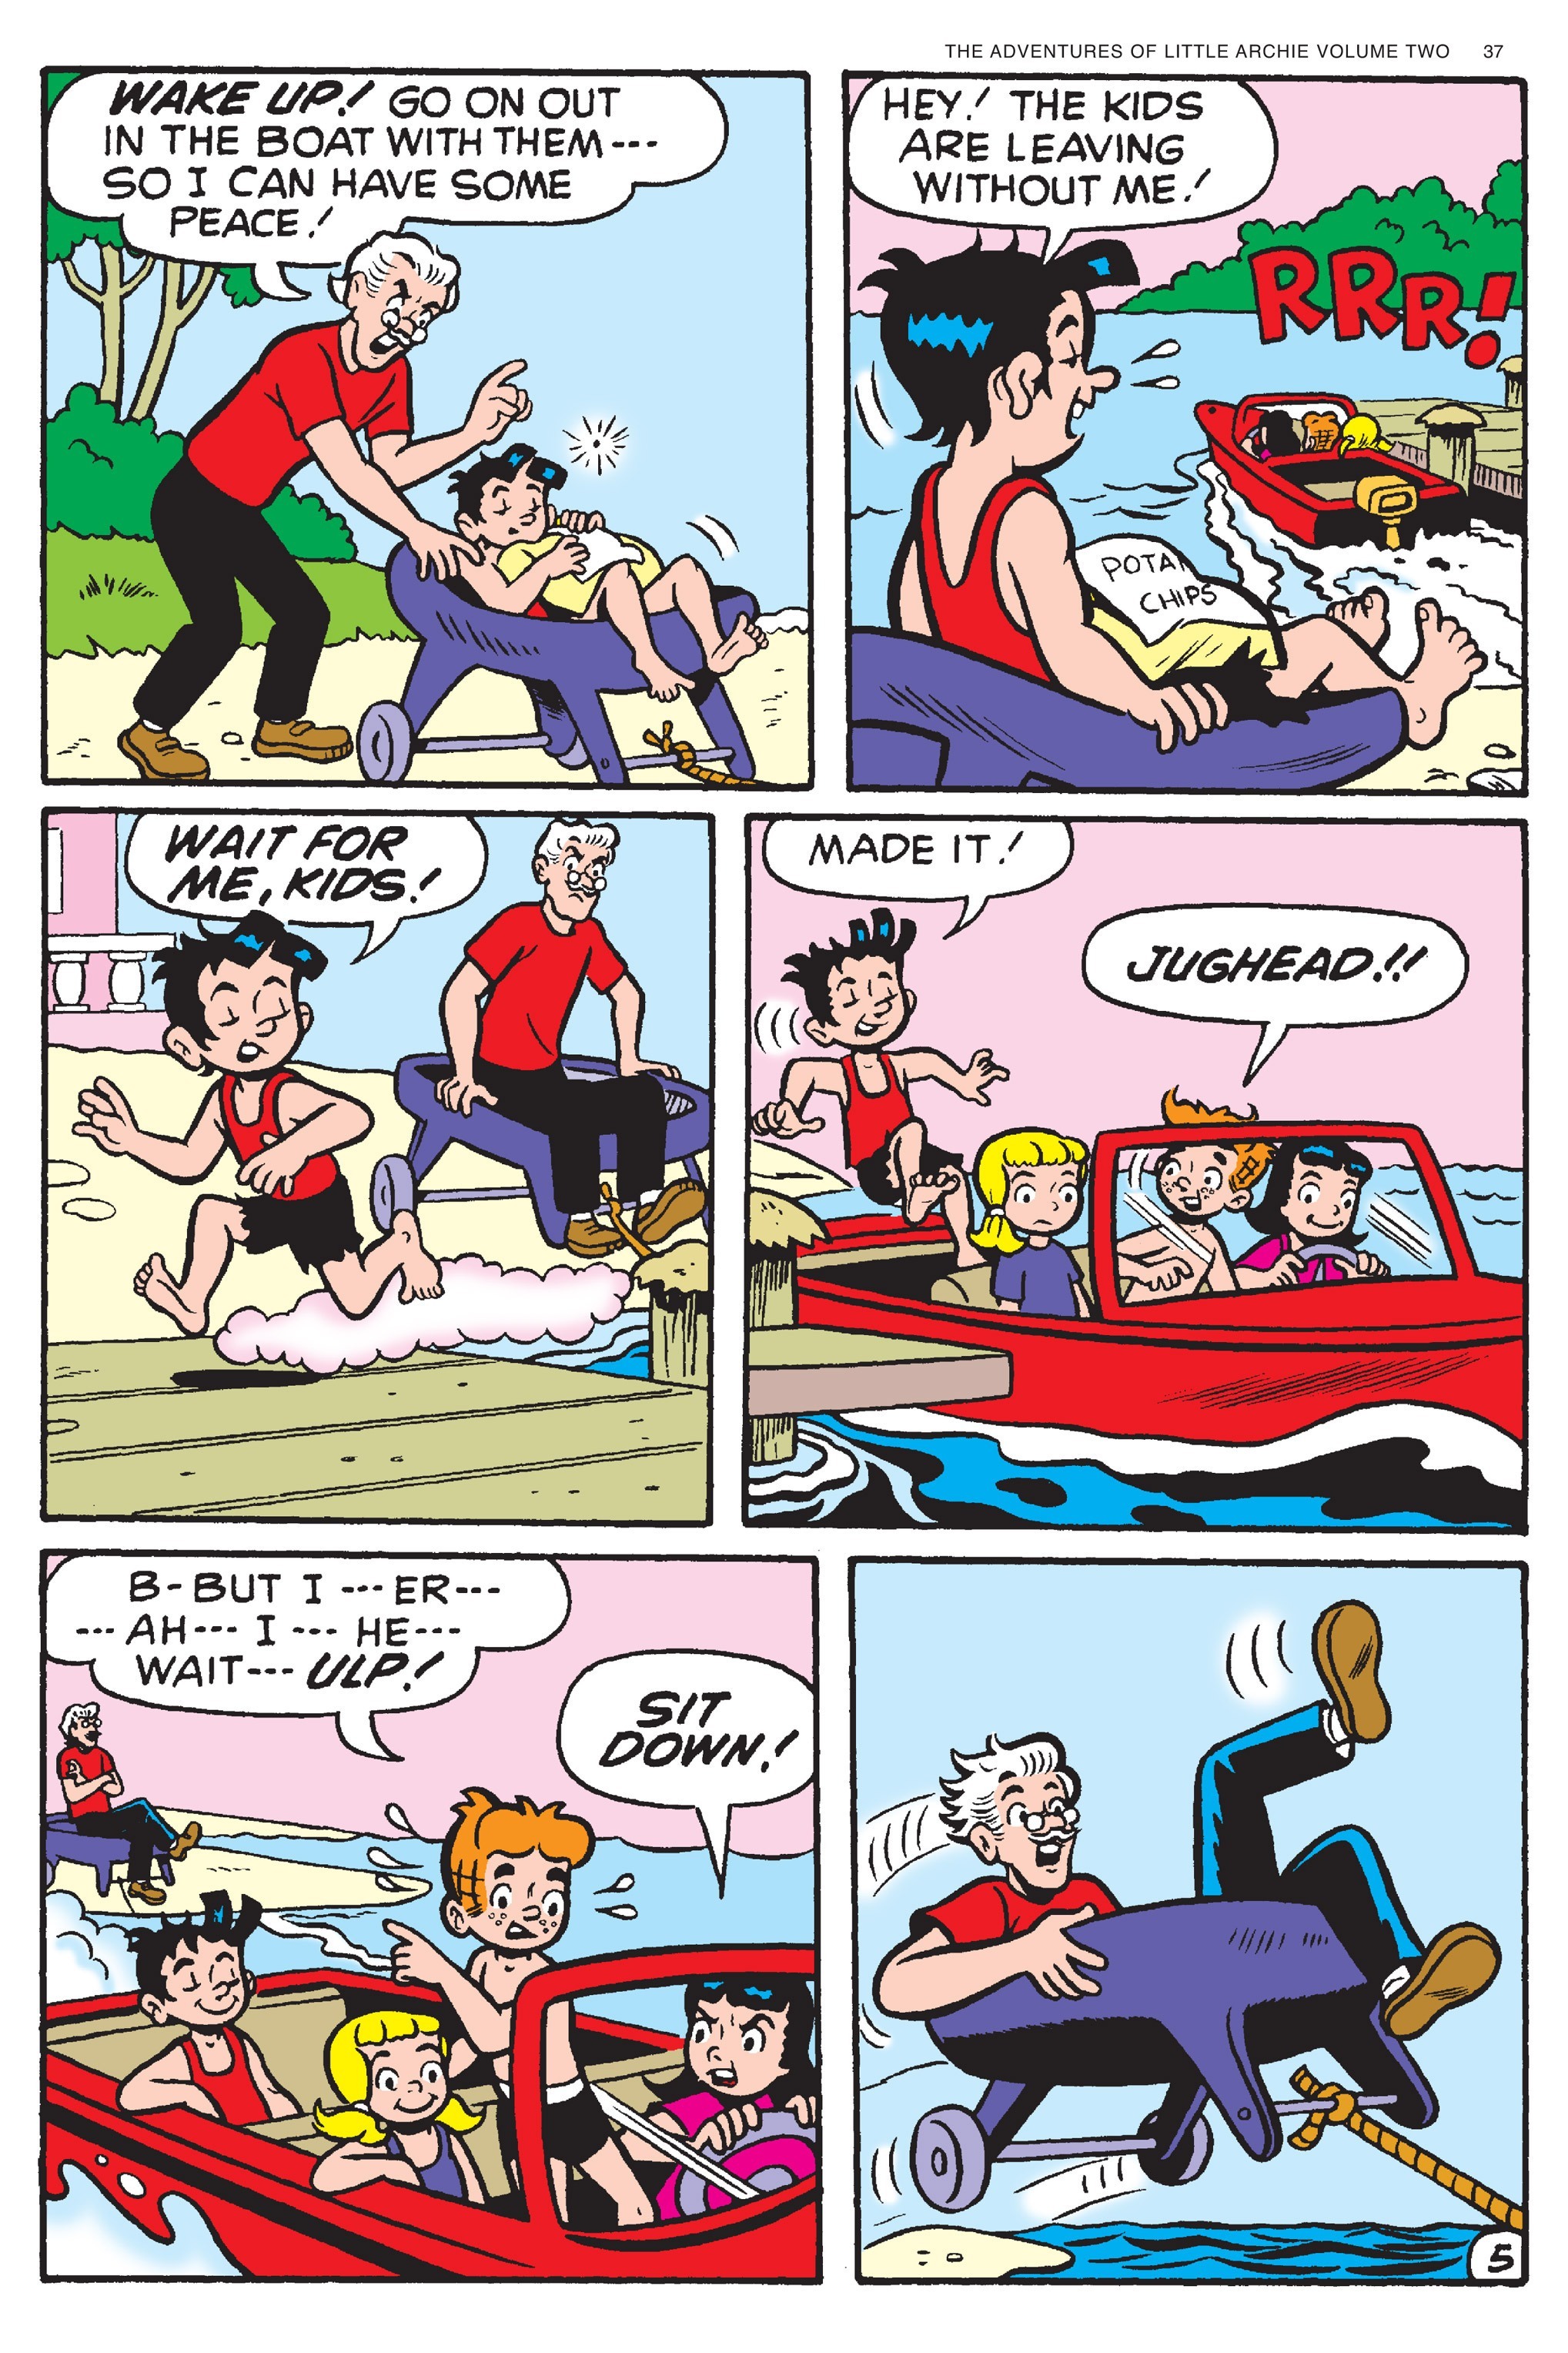 Read online Adventures of Little Archie comic -  Issue # TPB 2 - 38